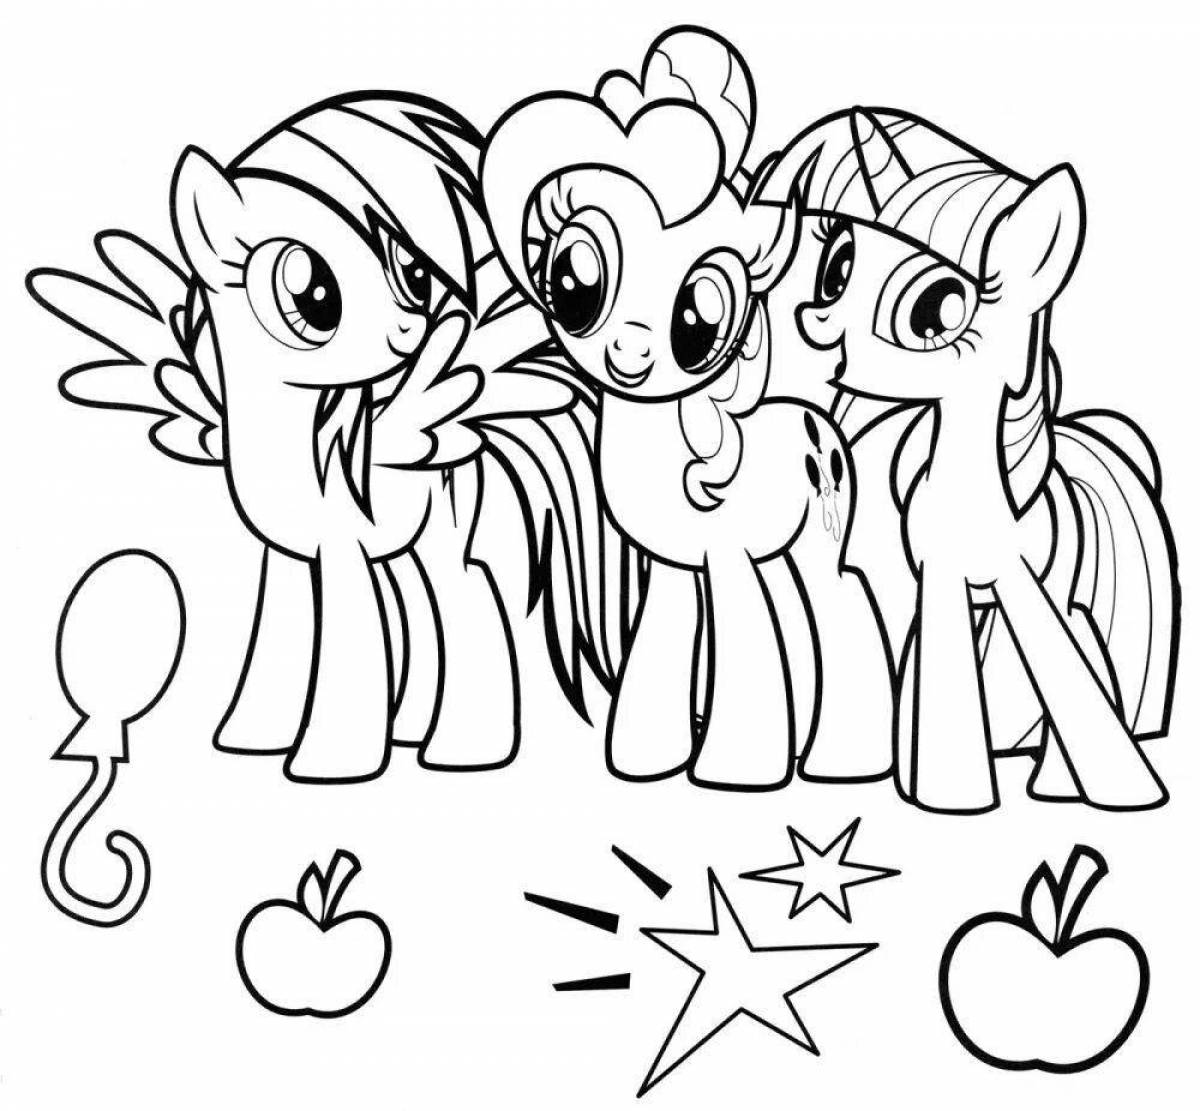 Fun coloring book sparkle and her friends